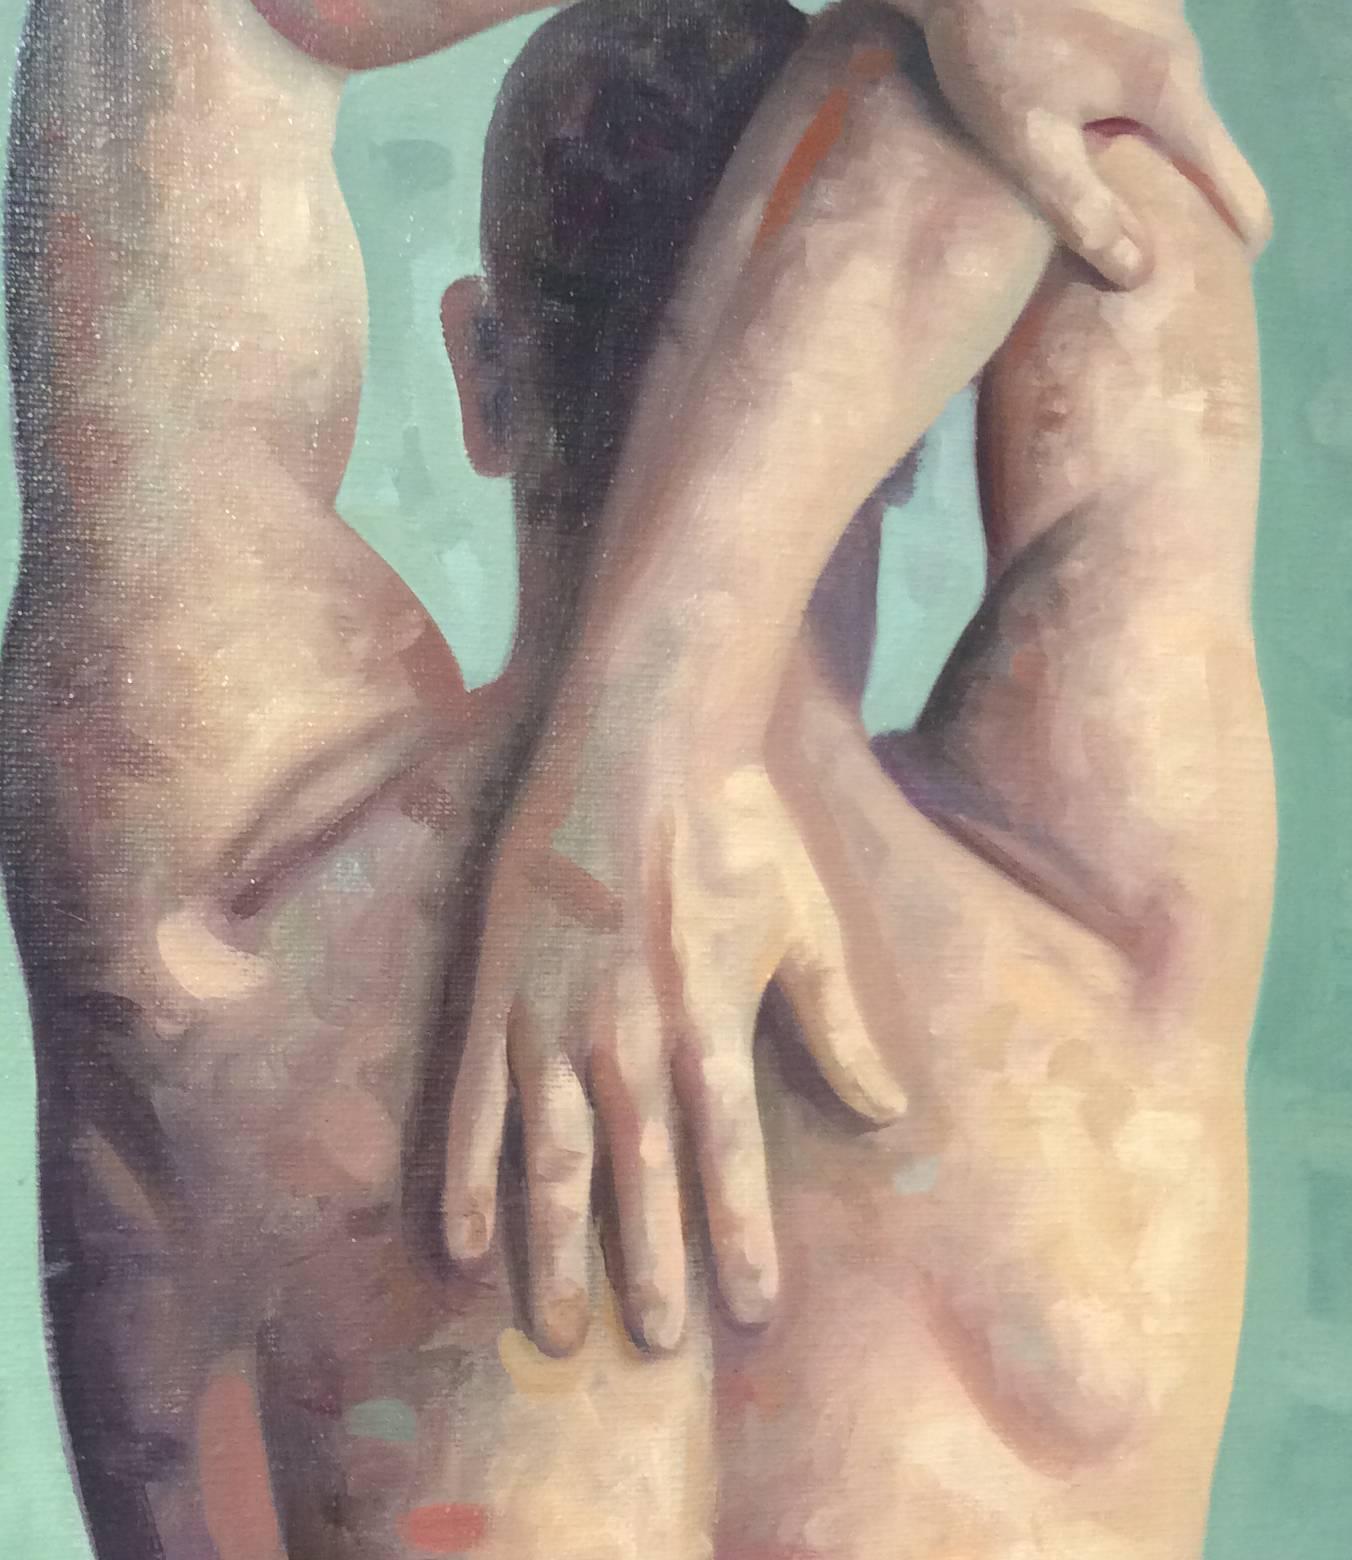 Anatomy Study 4 (Modern Figurative Oil Painting, Back of Male Nude in Frame) - Black Figurative Painting by Robert Goldstrom